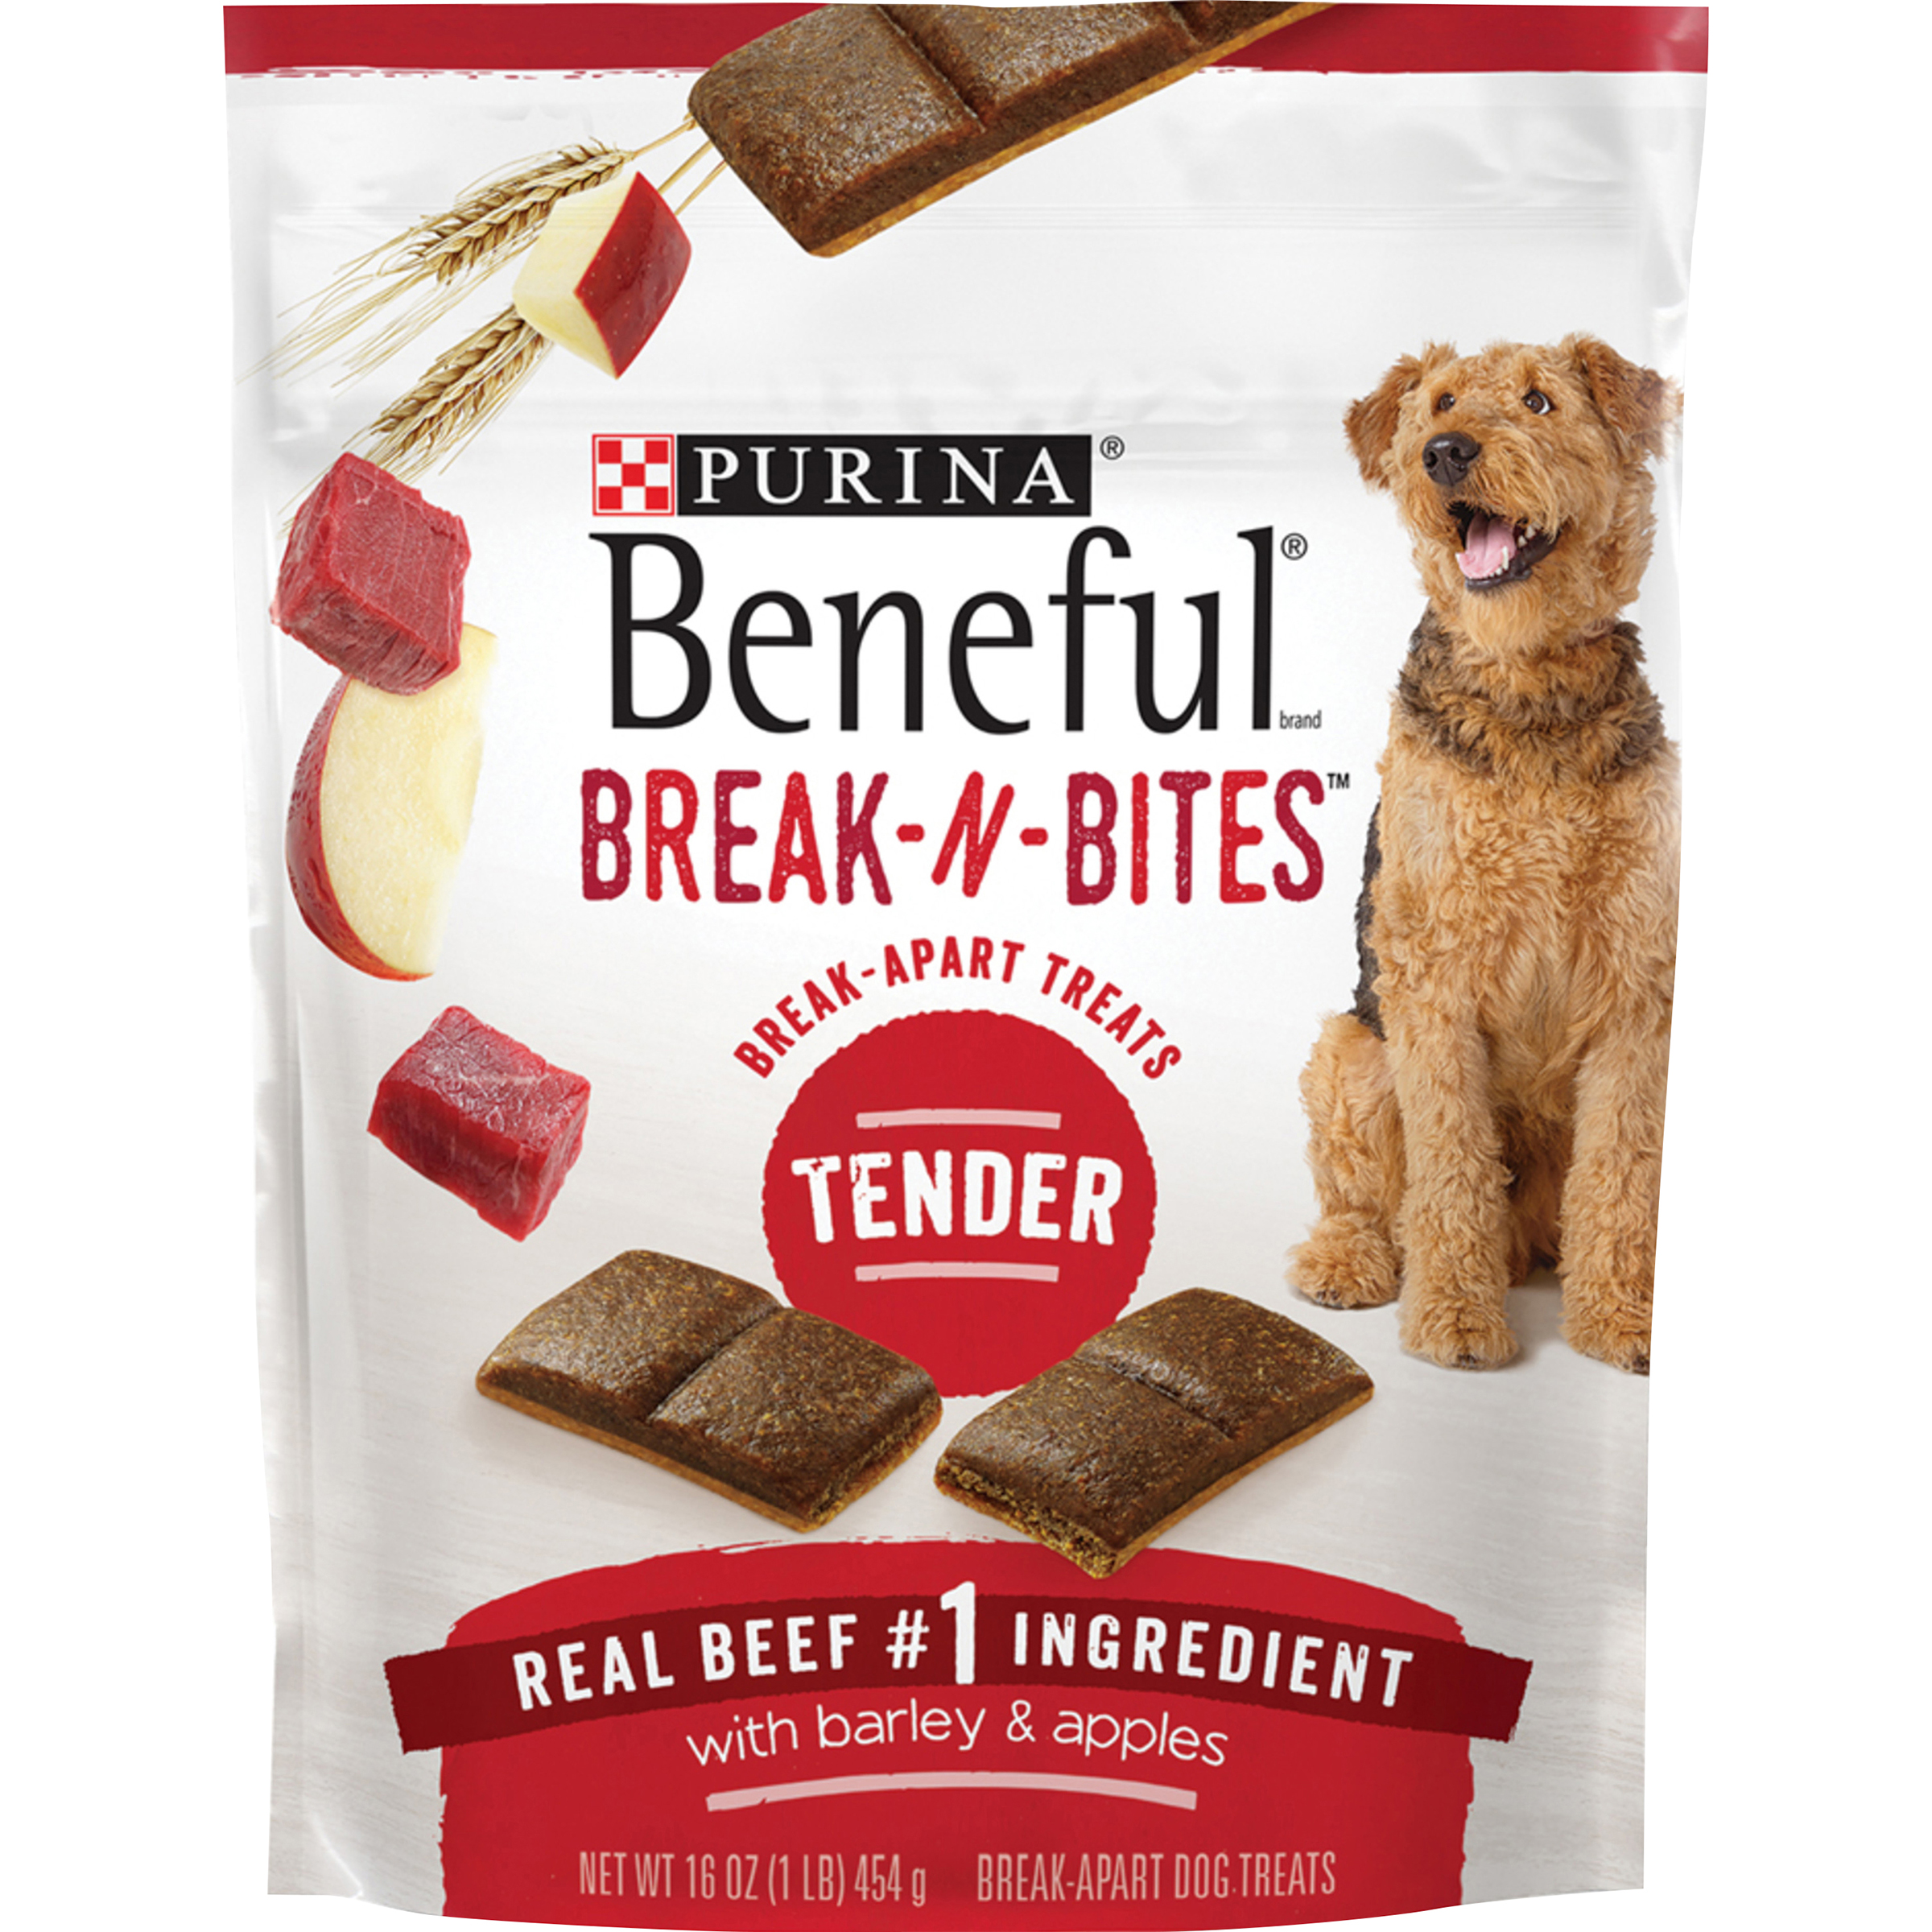 Nestle Purina Petcare Co. Purina Beneful Break-N-Bites Tender Real Beef with Barley & Apples Dog Treats, 16 oz. Pouch